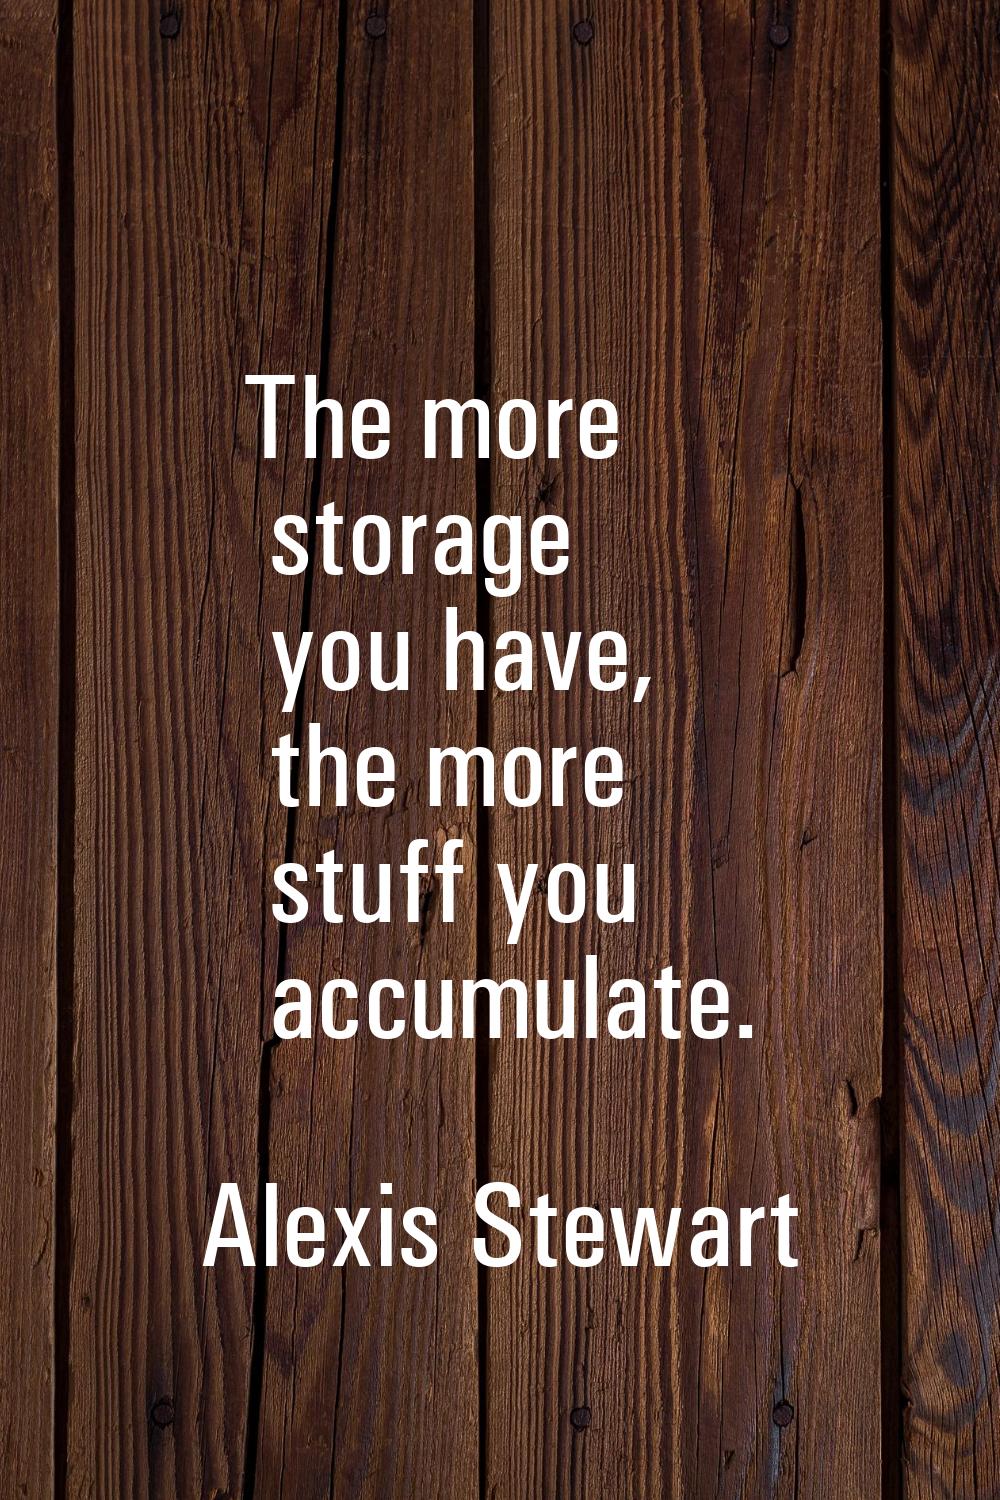 The more storage you have, the more stuff you accumulate.